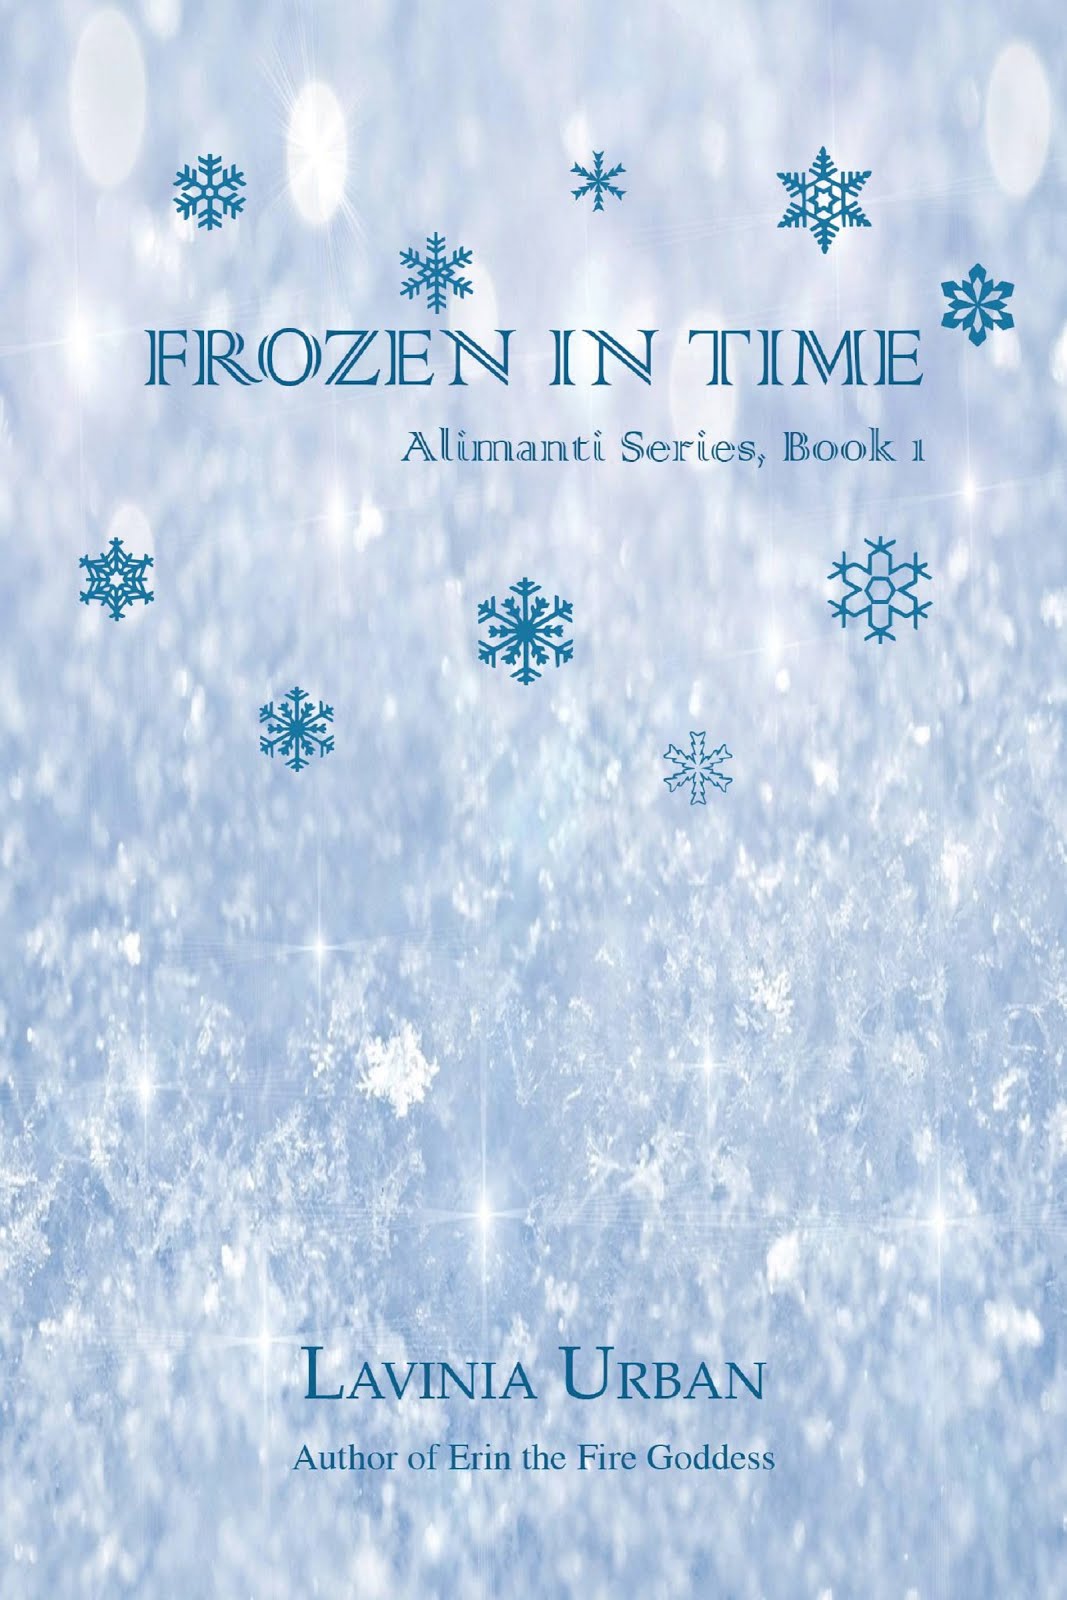 Frozen in Time: Alimanti series, Book 1